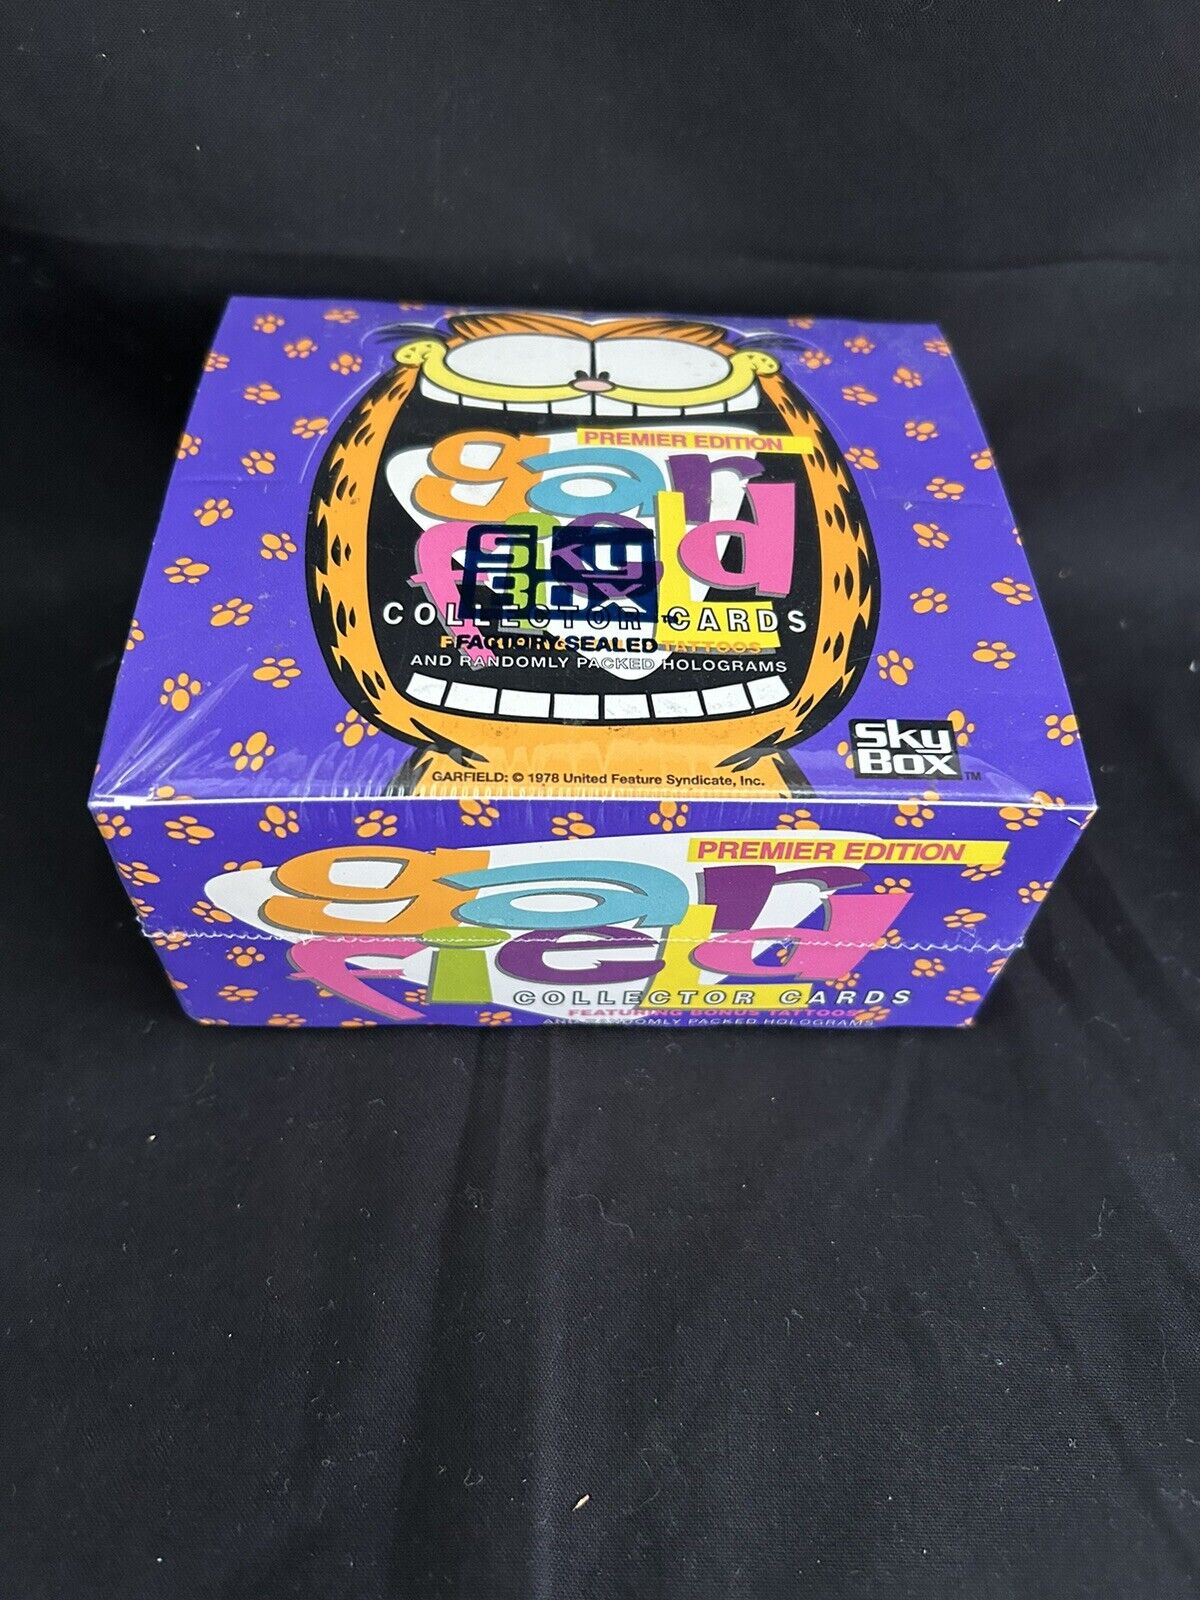 Brand New Sealed 1992 Garfield Collector Series Box Skybox 